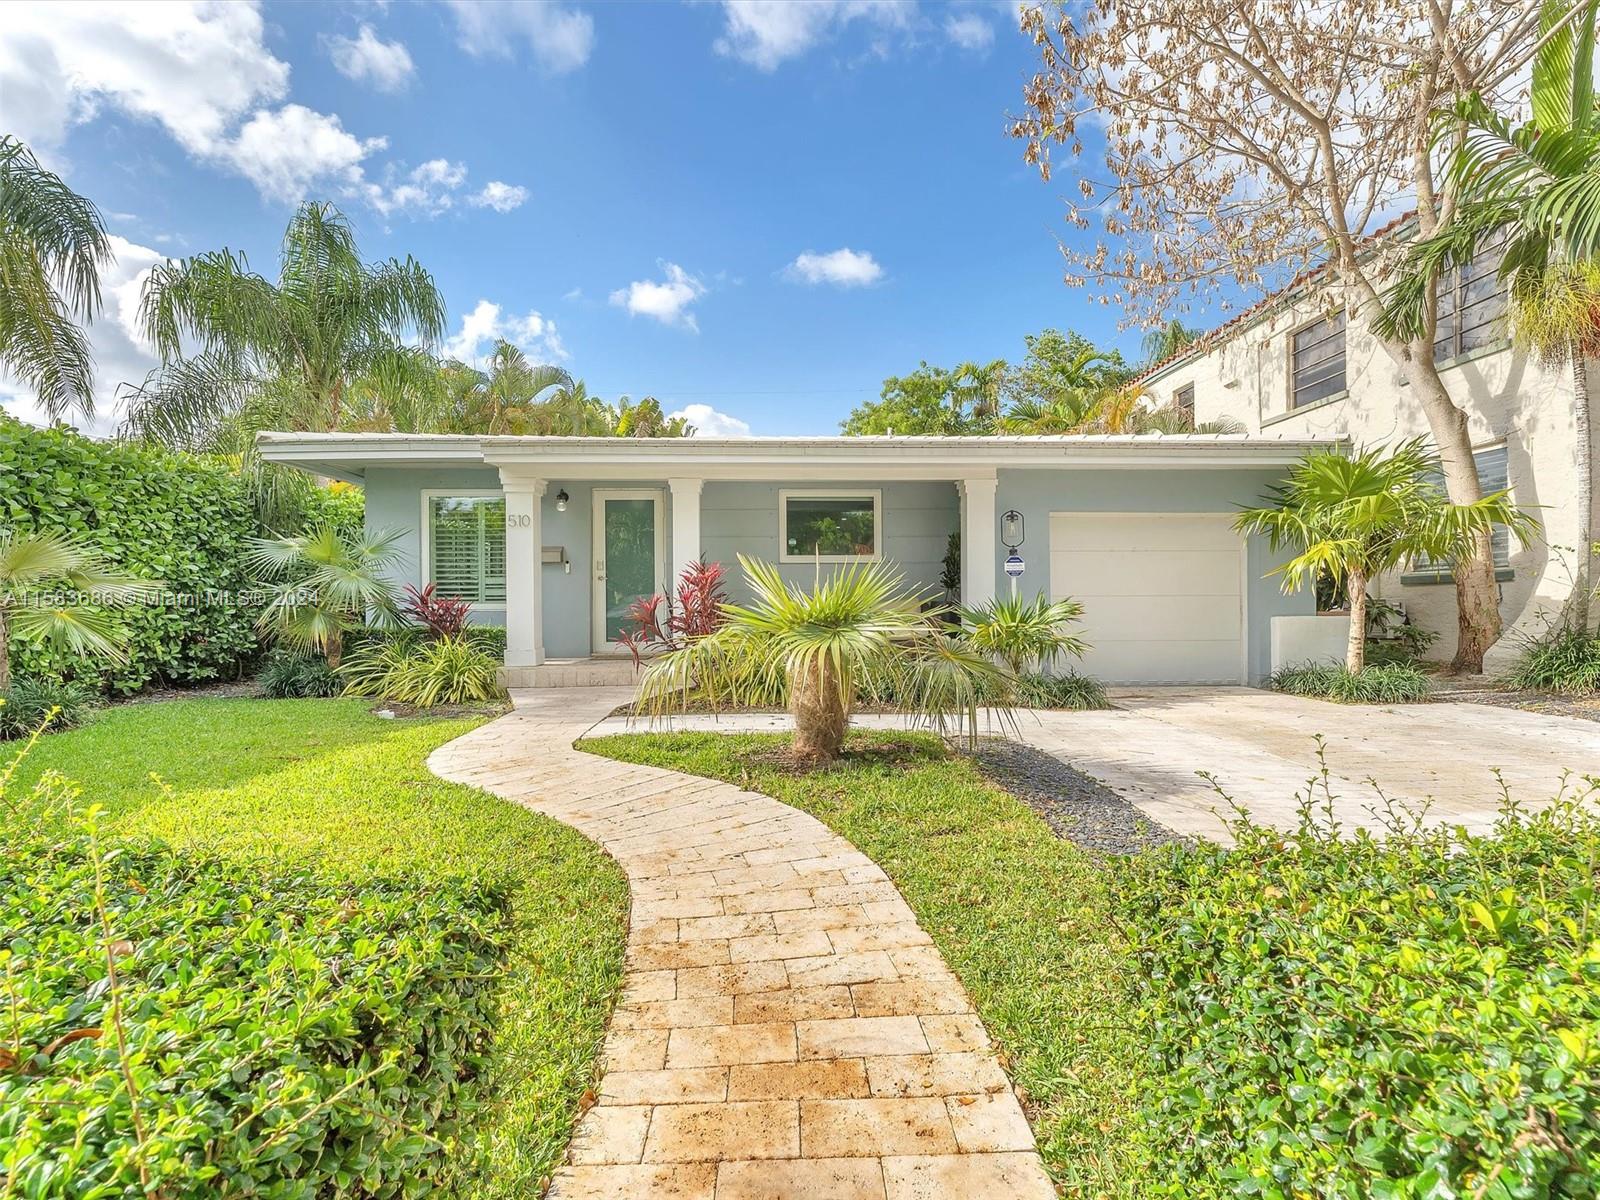 Property for Sale at 510 Palermo Ave, Coral Gables, Broward County, Florida - Bedrooms: 3 
Bathrooms: 2  - $1,575,000